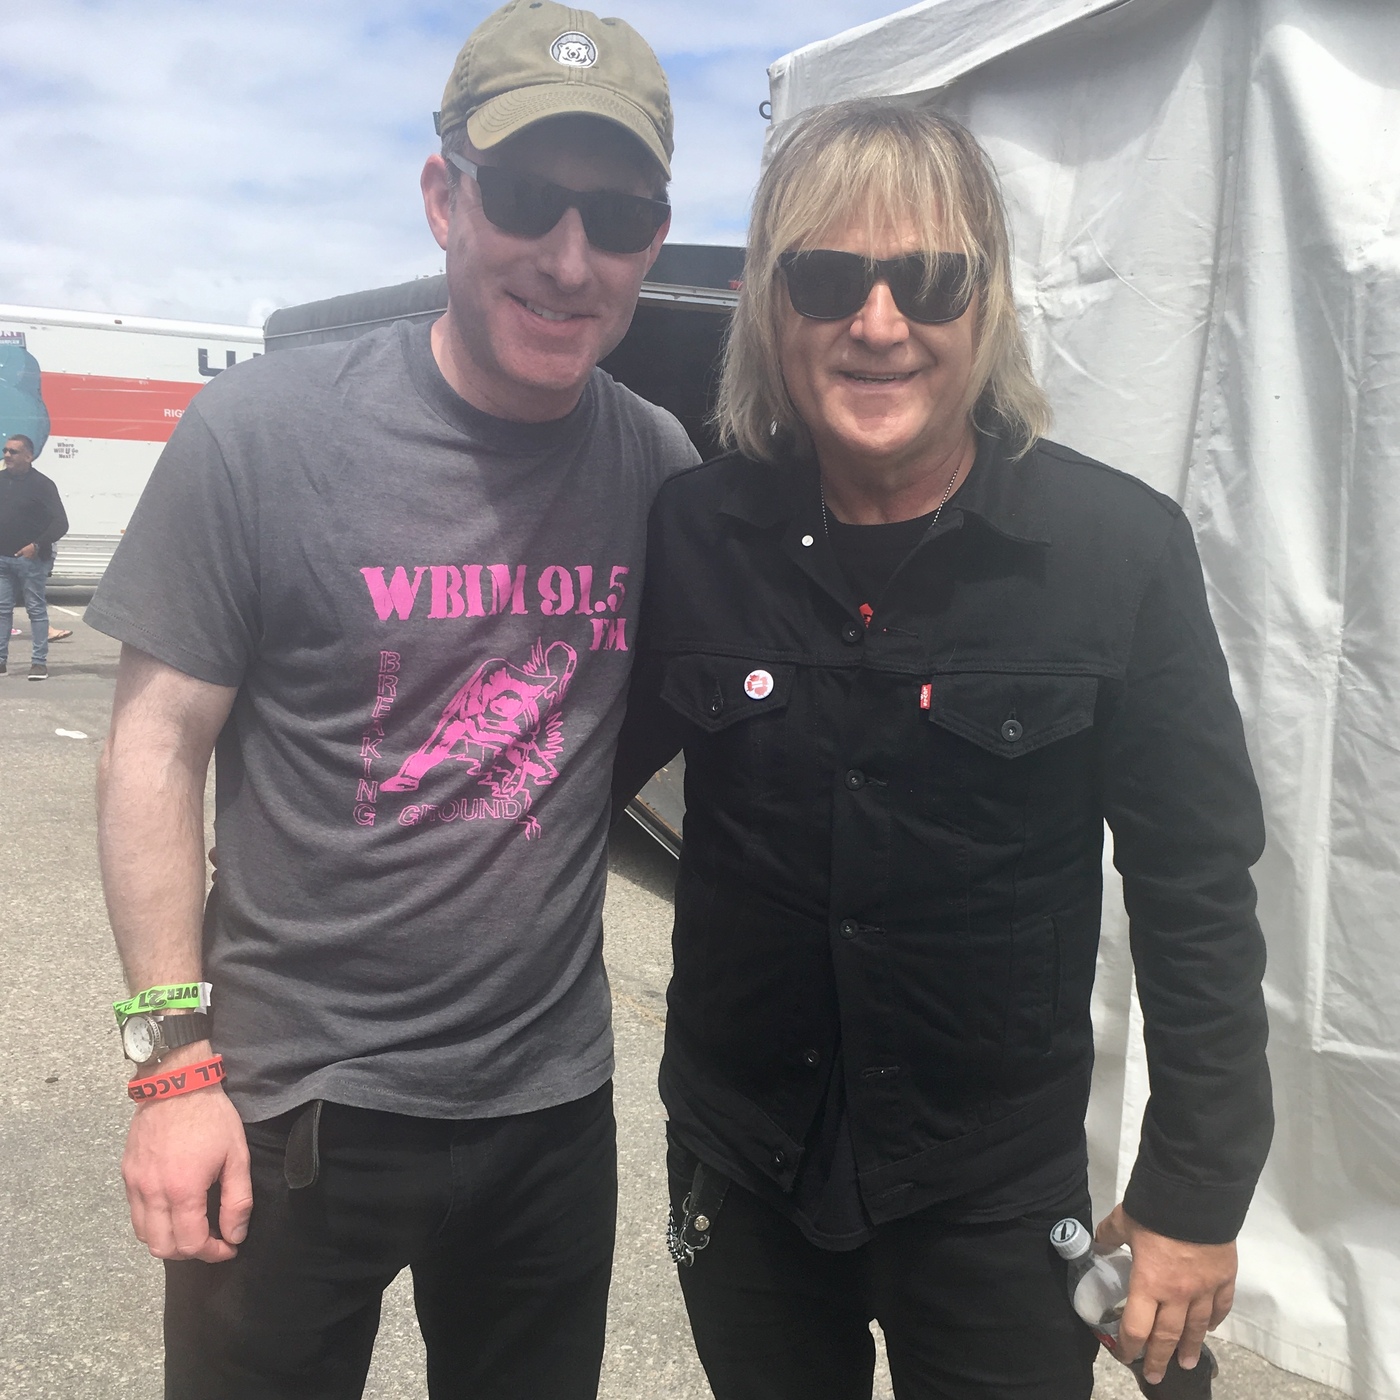 Episode 59: The Alternative: Interview with The Alarm's Mike Peters (03.15.21)